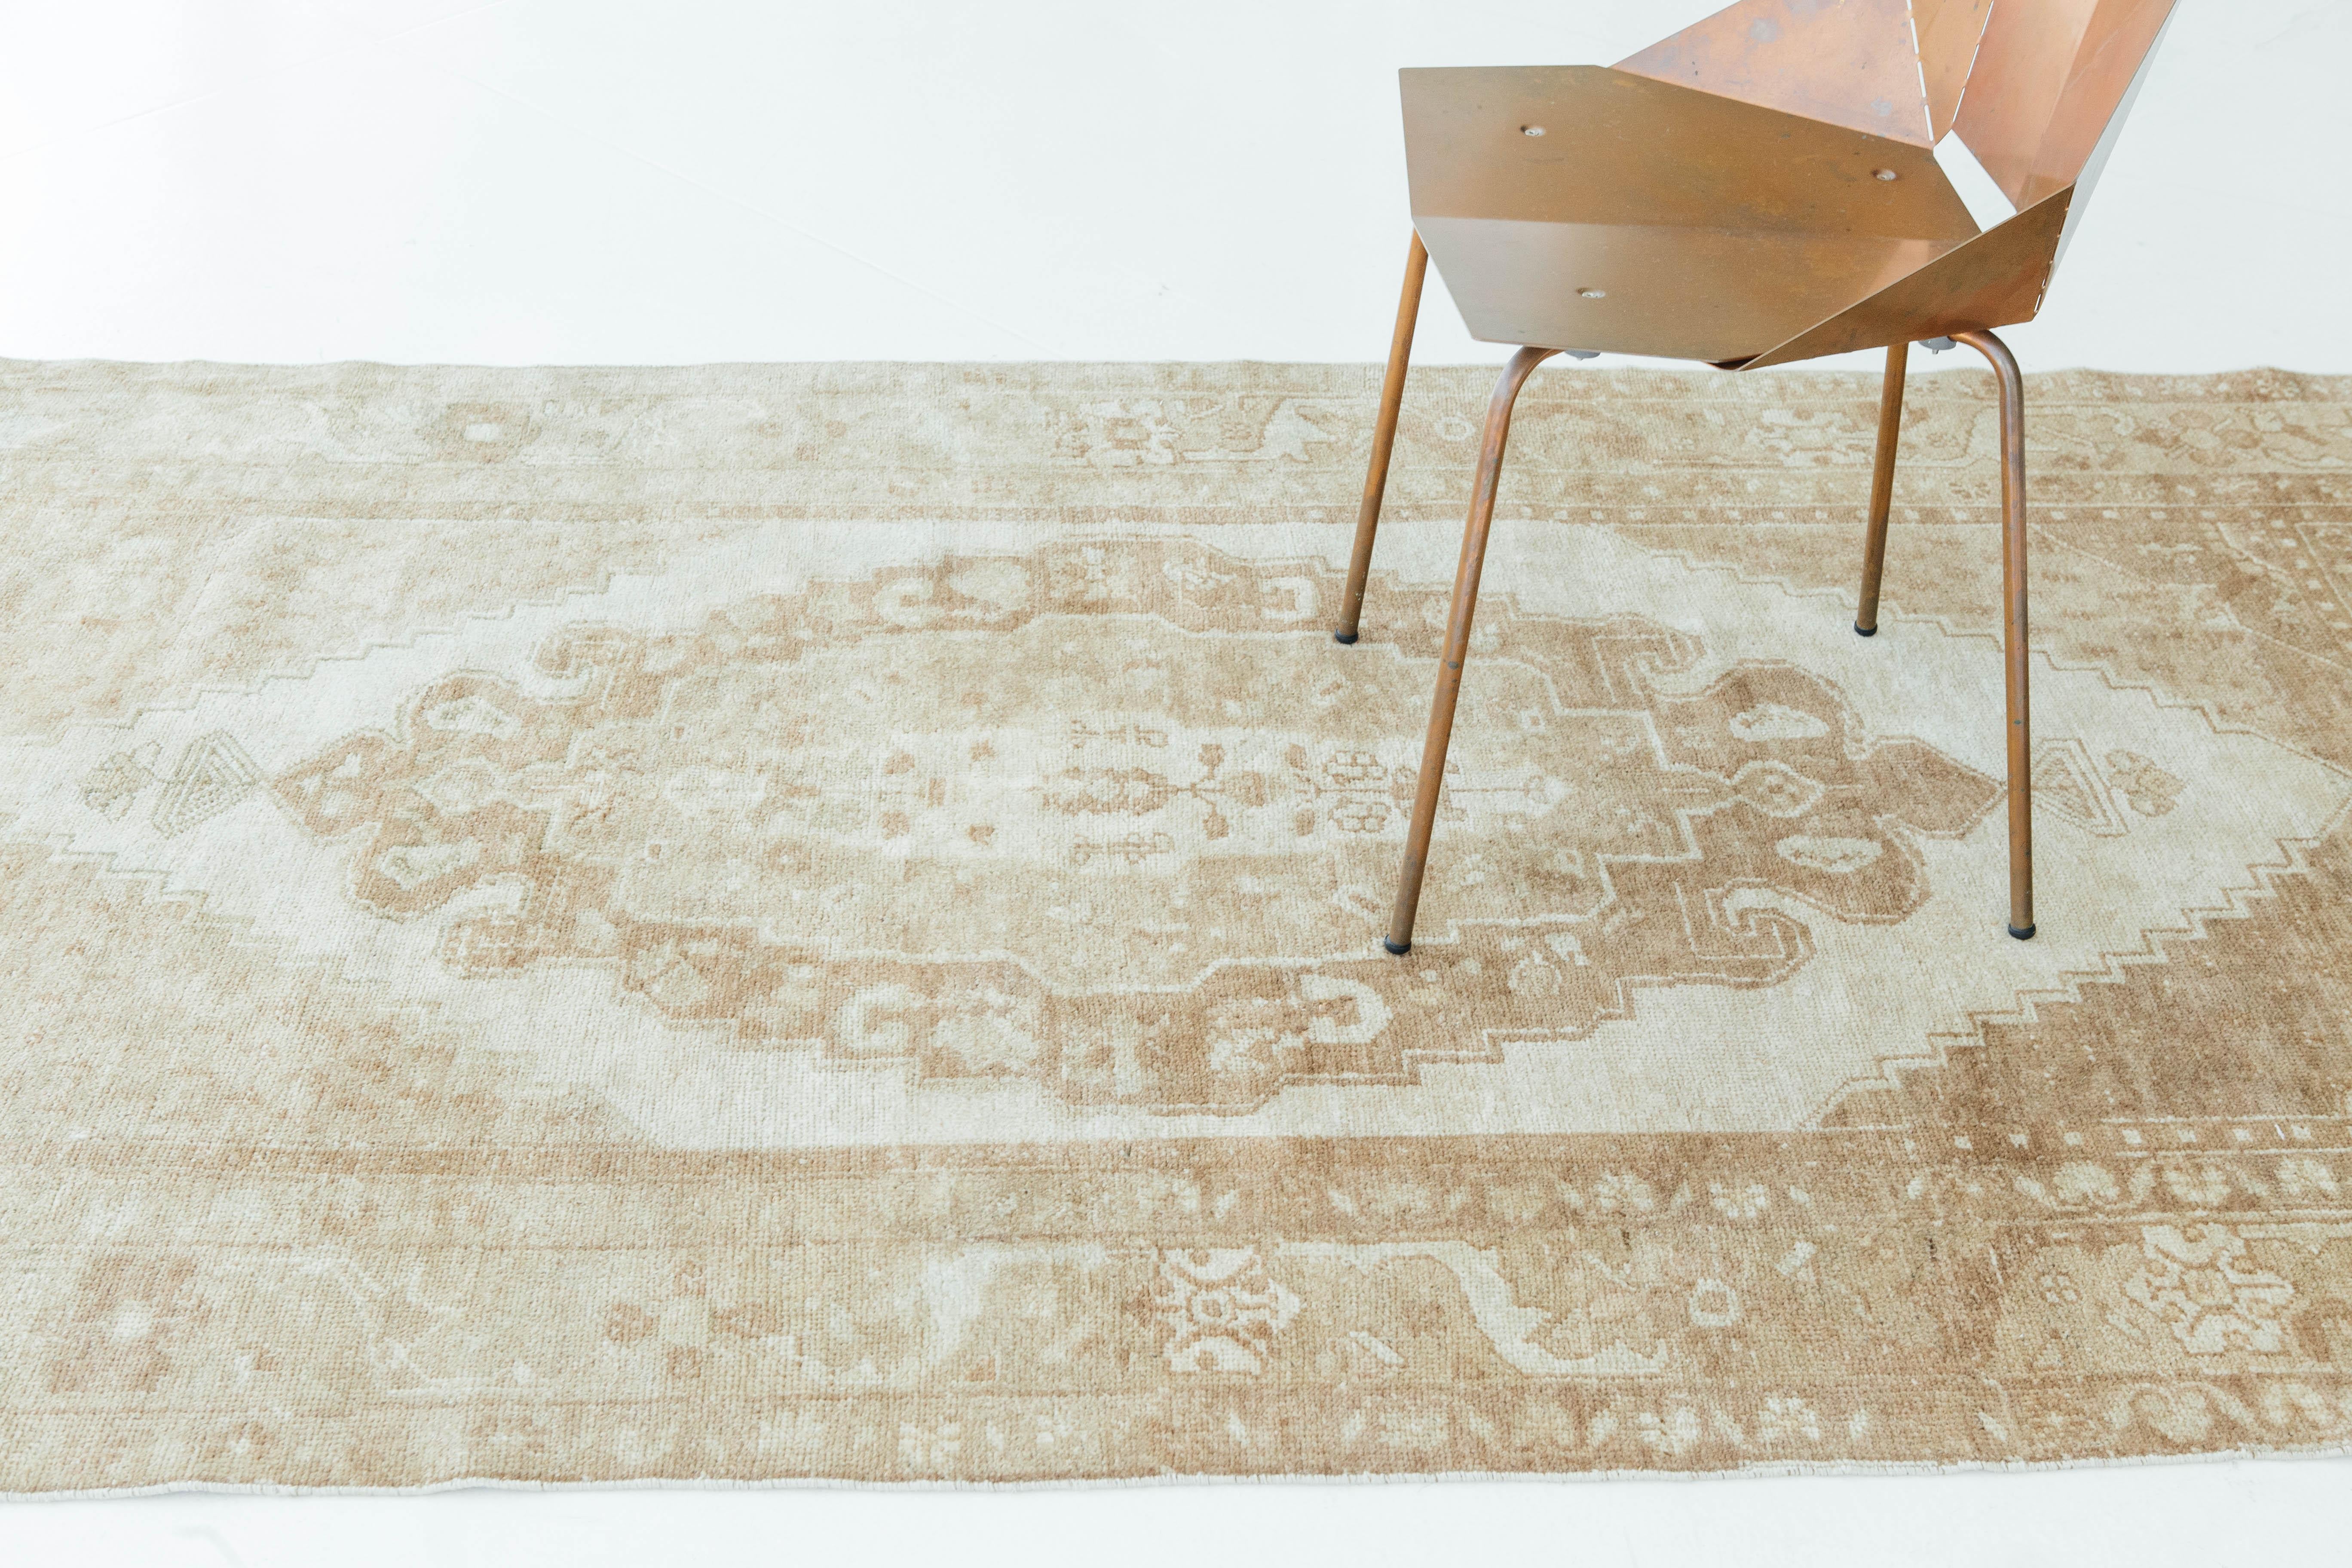 A vintage Turkish Anatolian runner in various hues of tan and ivory. Anatolian rugs are weaved in Anatolia or Asia Minor where rugs are known for their central medallion and symmetrical floral and geometric designs. This vintage runner bring